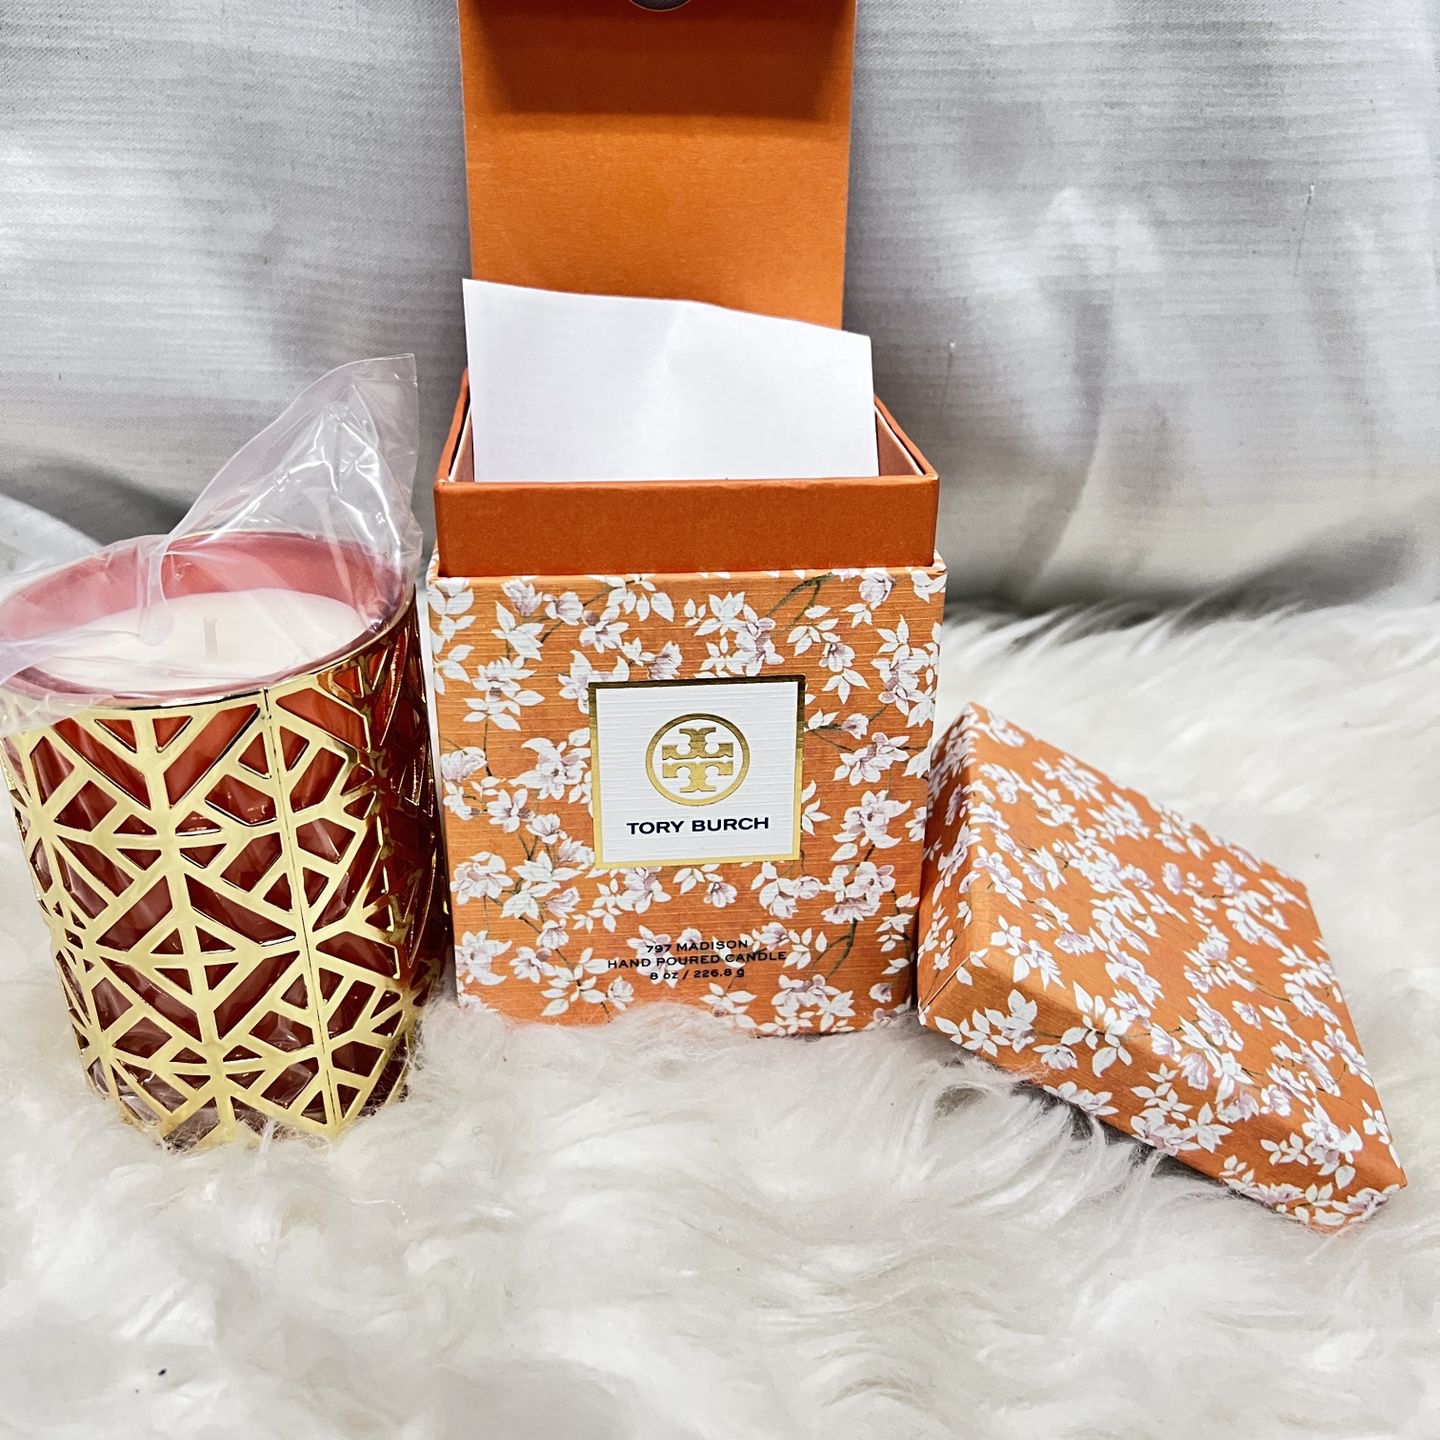 Tory Burch Hand-Poured Candle for Sale in Miami, FL - OfferUp